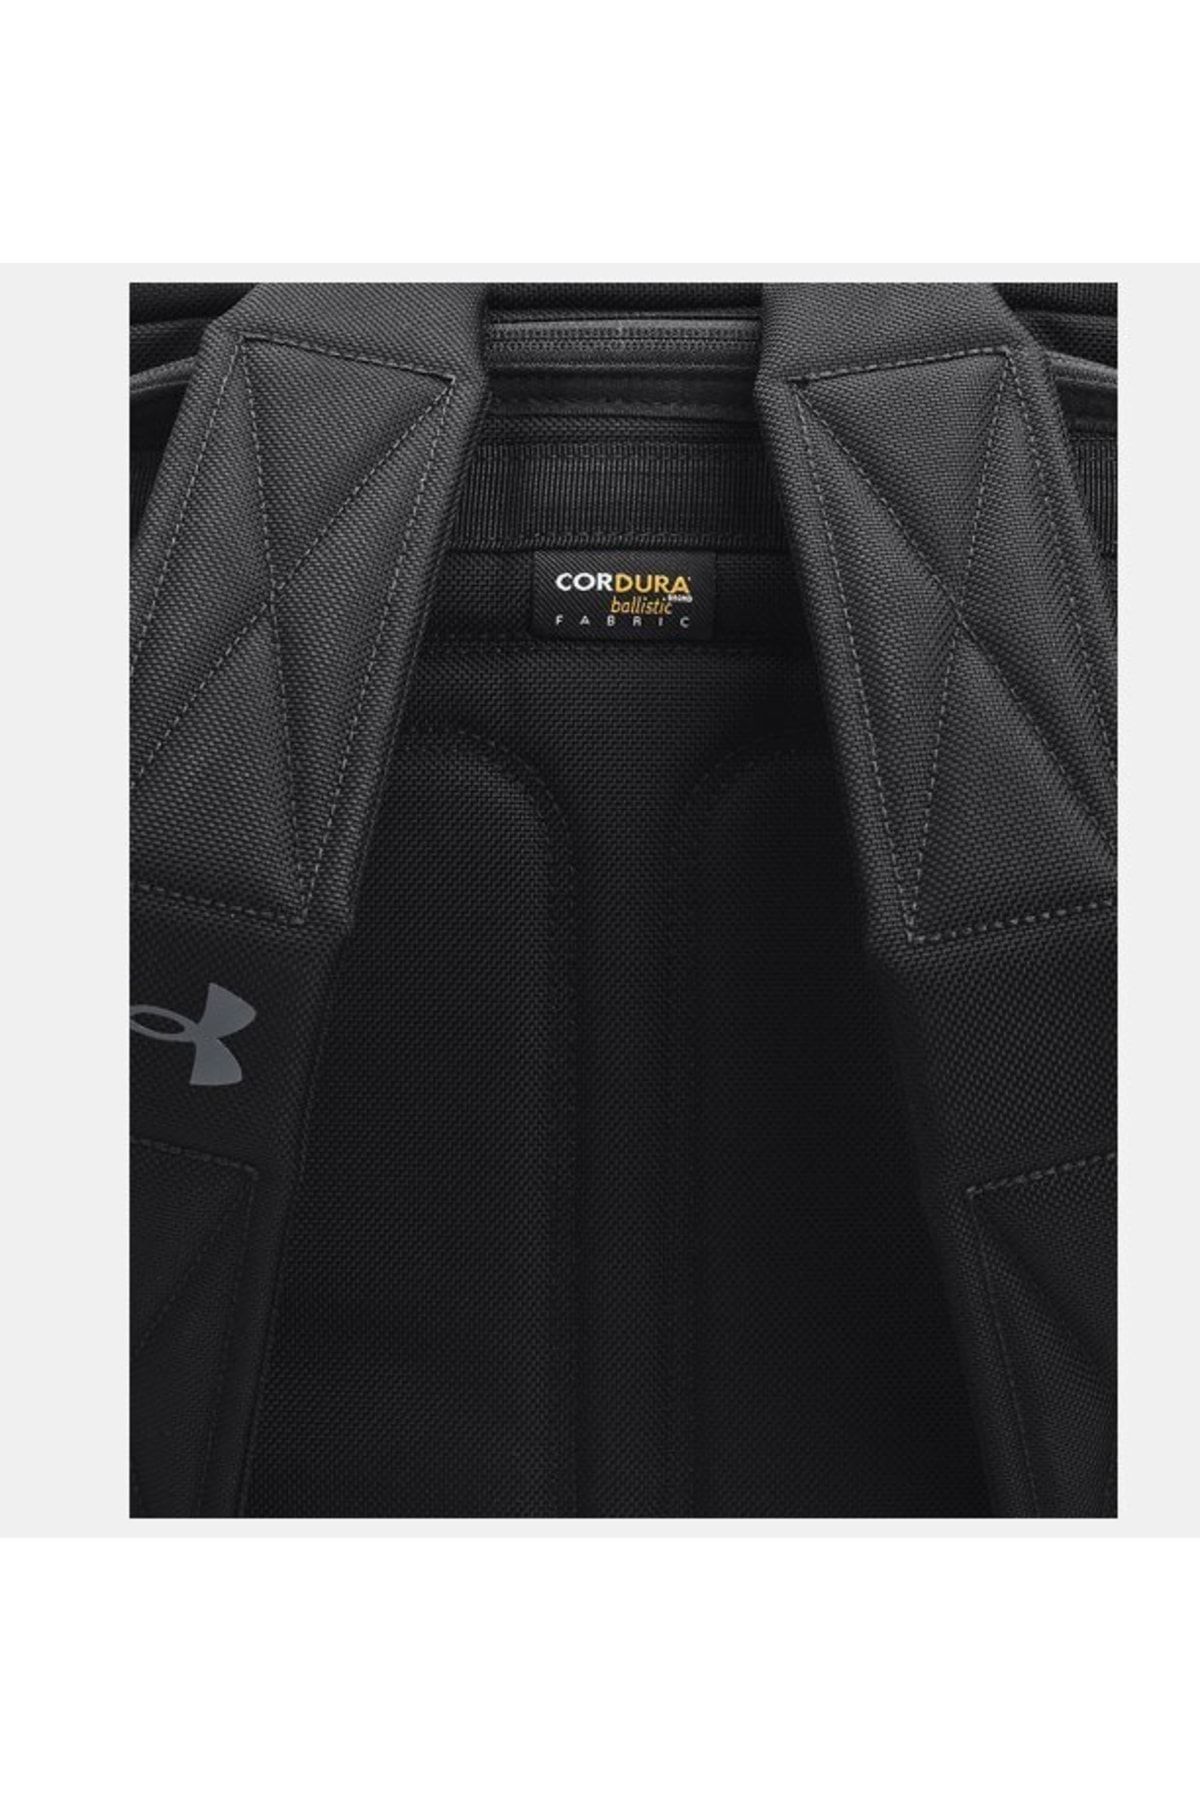 Under Armour Project Rock Pro Box Bookpack 1372292-001